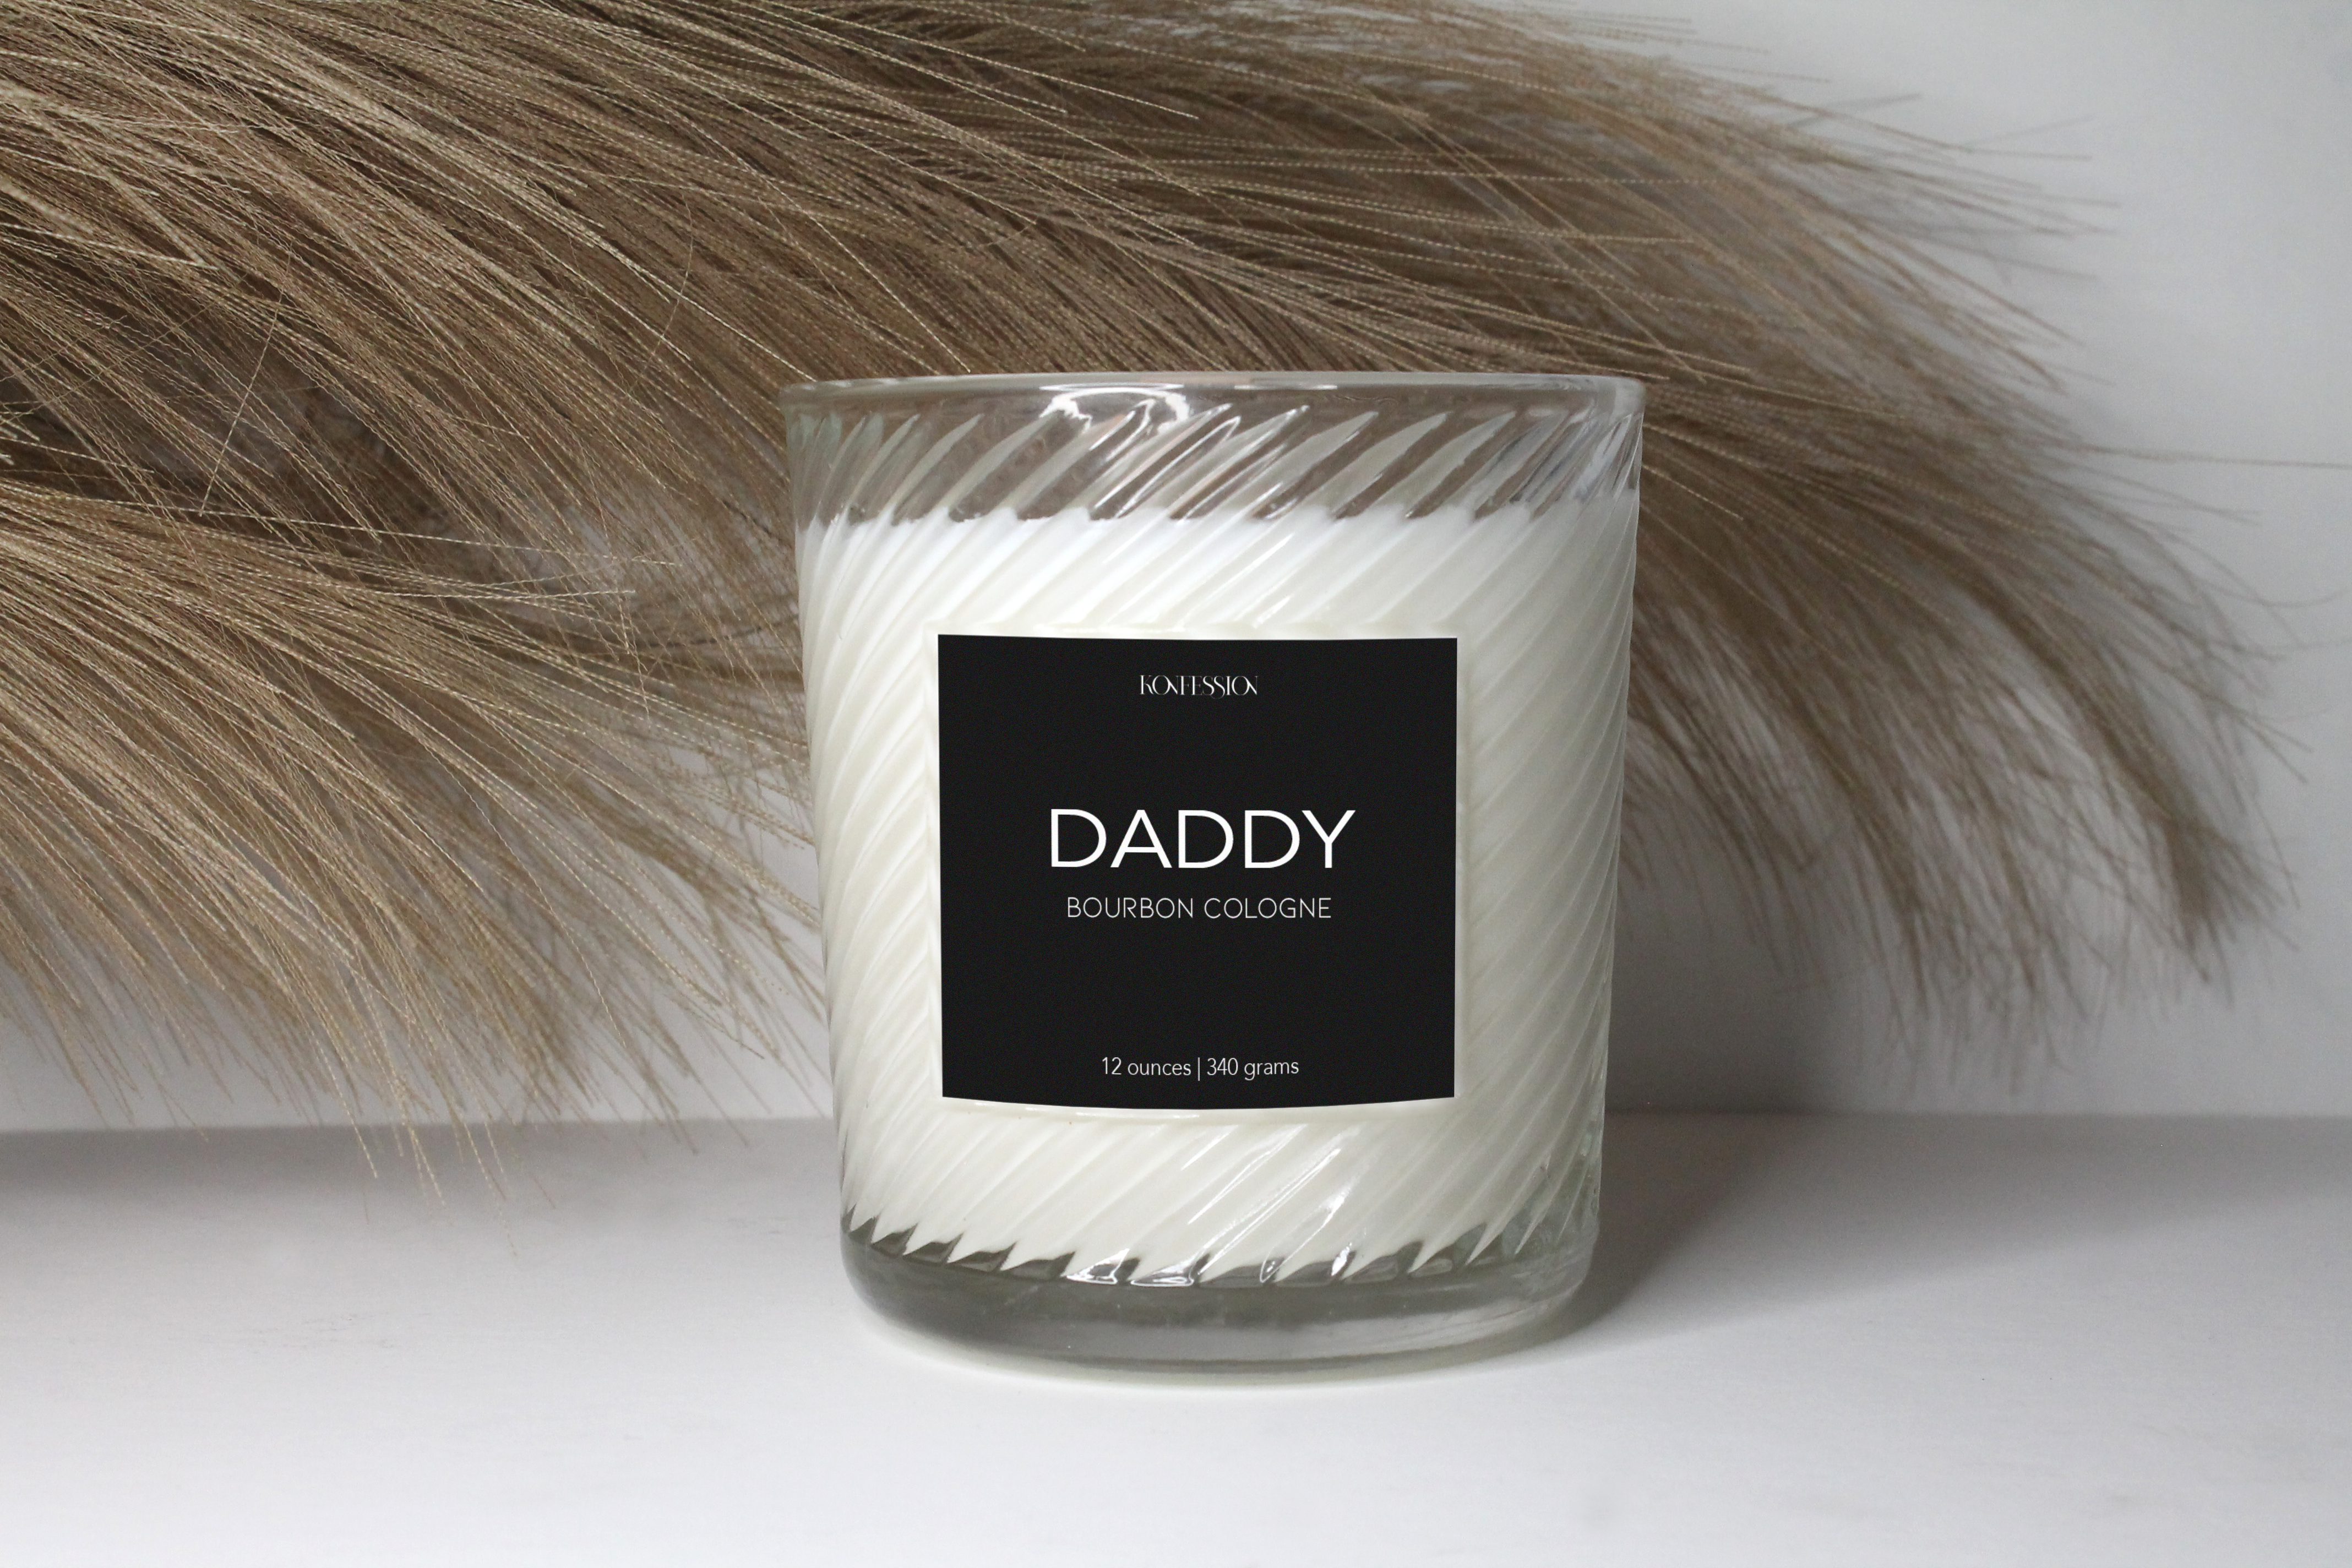 12 ounce Daddy candle in the scent of bourbon cologne.